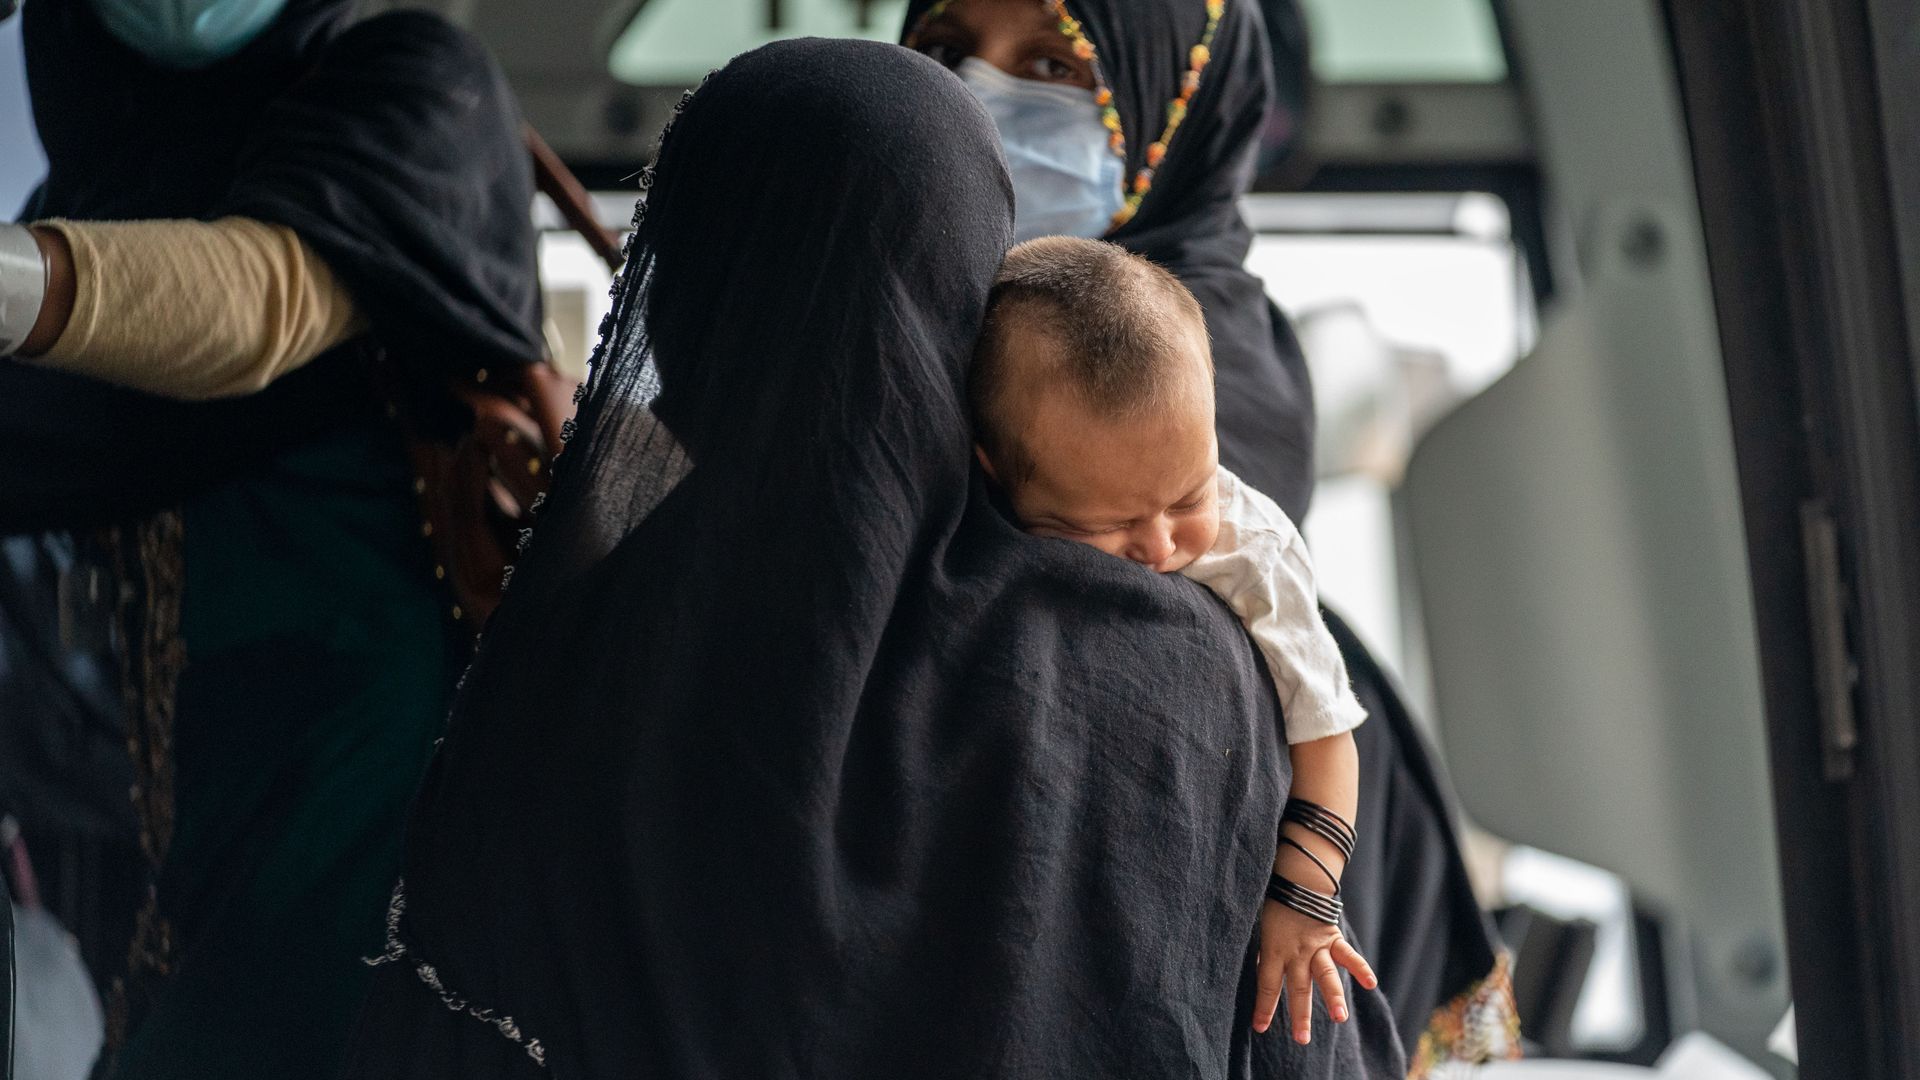 An Afghan refugee holding a sleeping baby at Dulles Airport